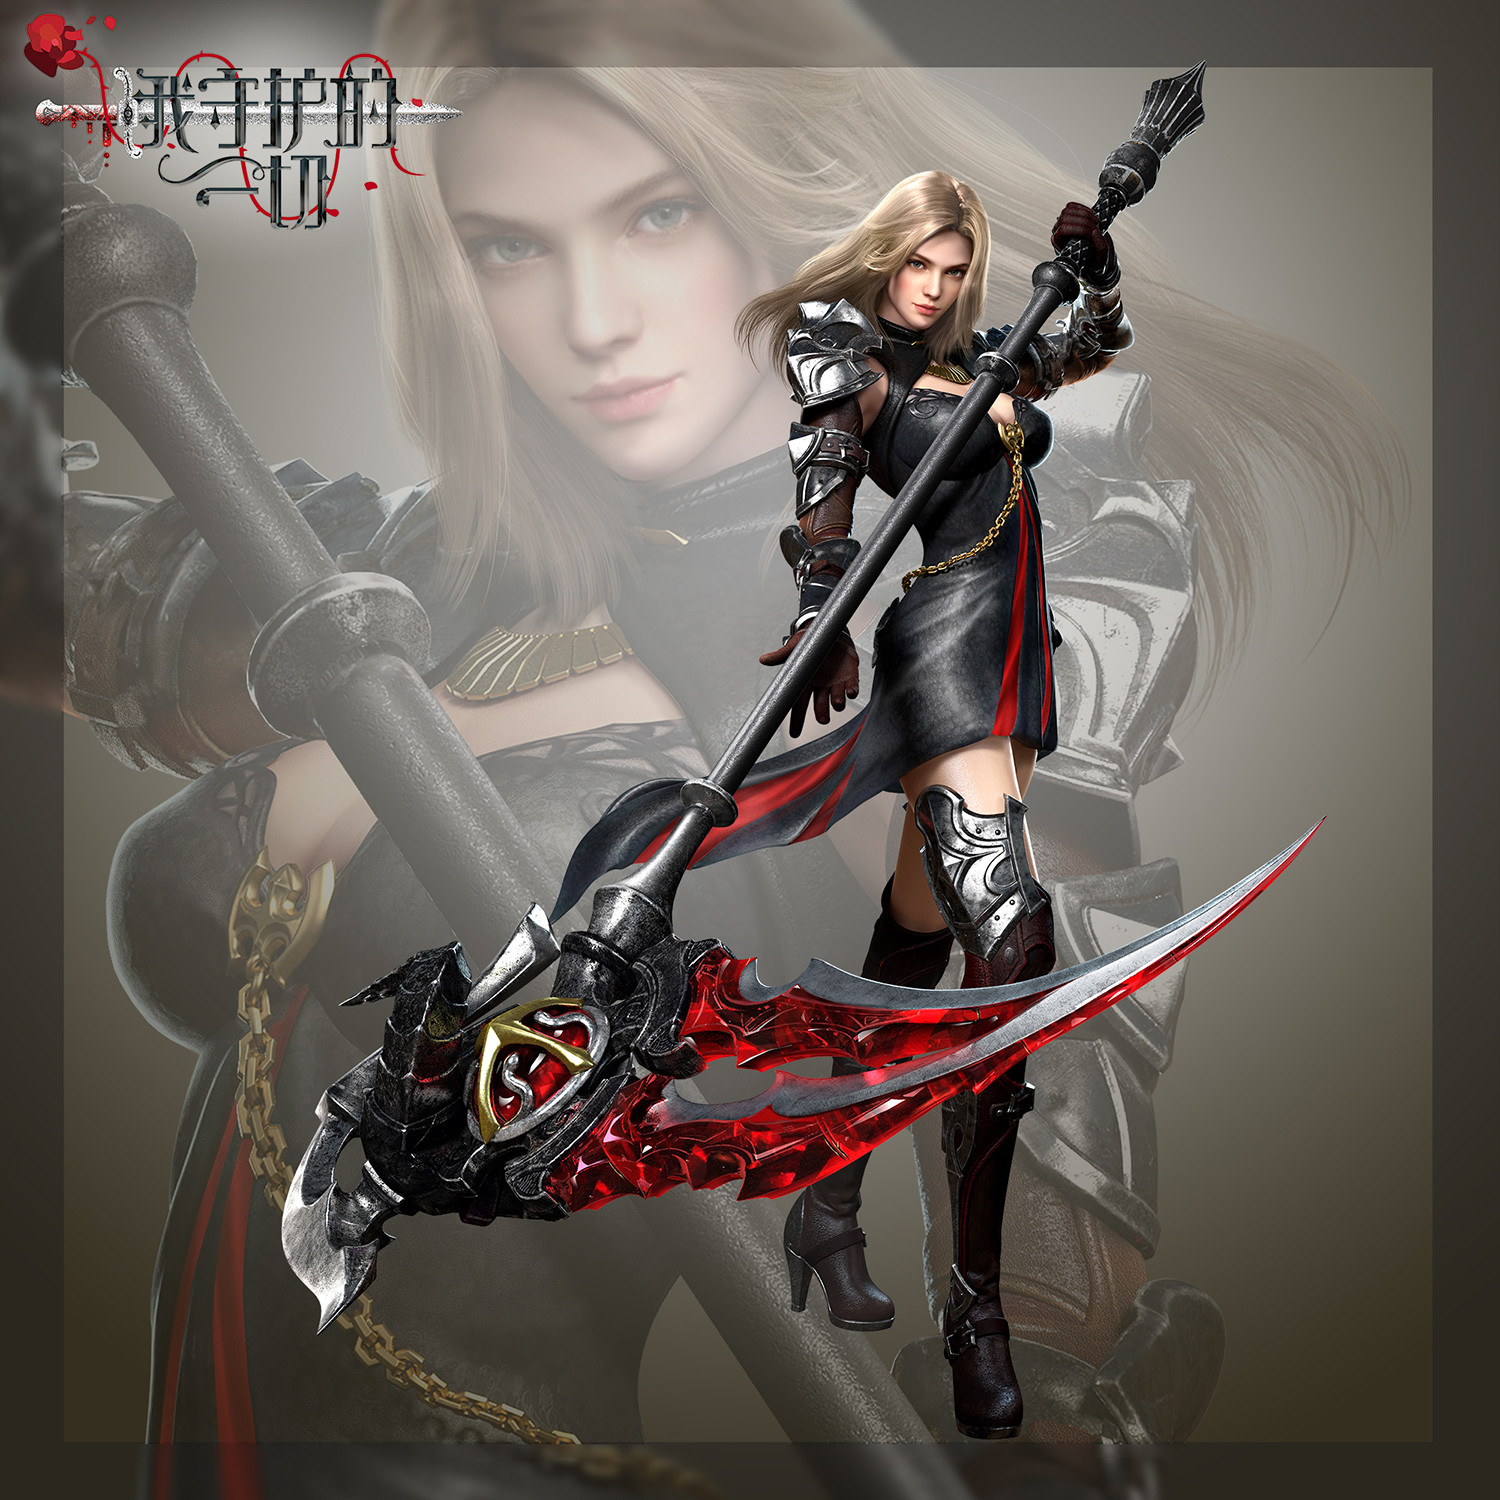 3Q Studio Drawing Women Blonde Long Hair Wind Armor Gloves Dress Black Clothing Red Clothing Weapon  1500x1500